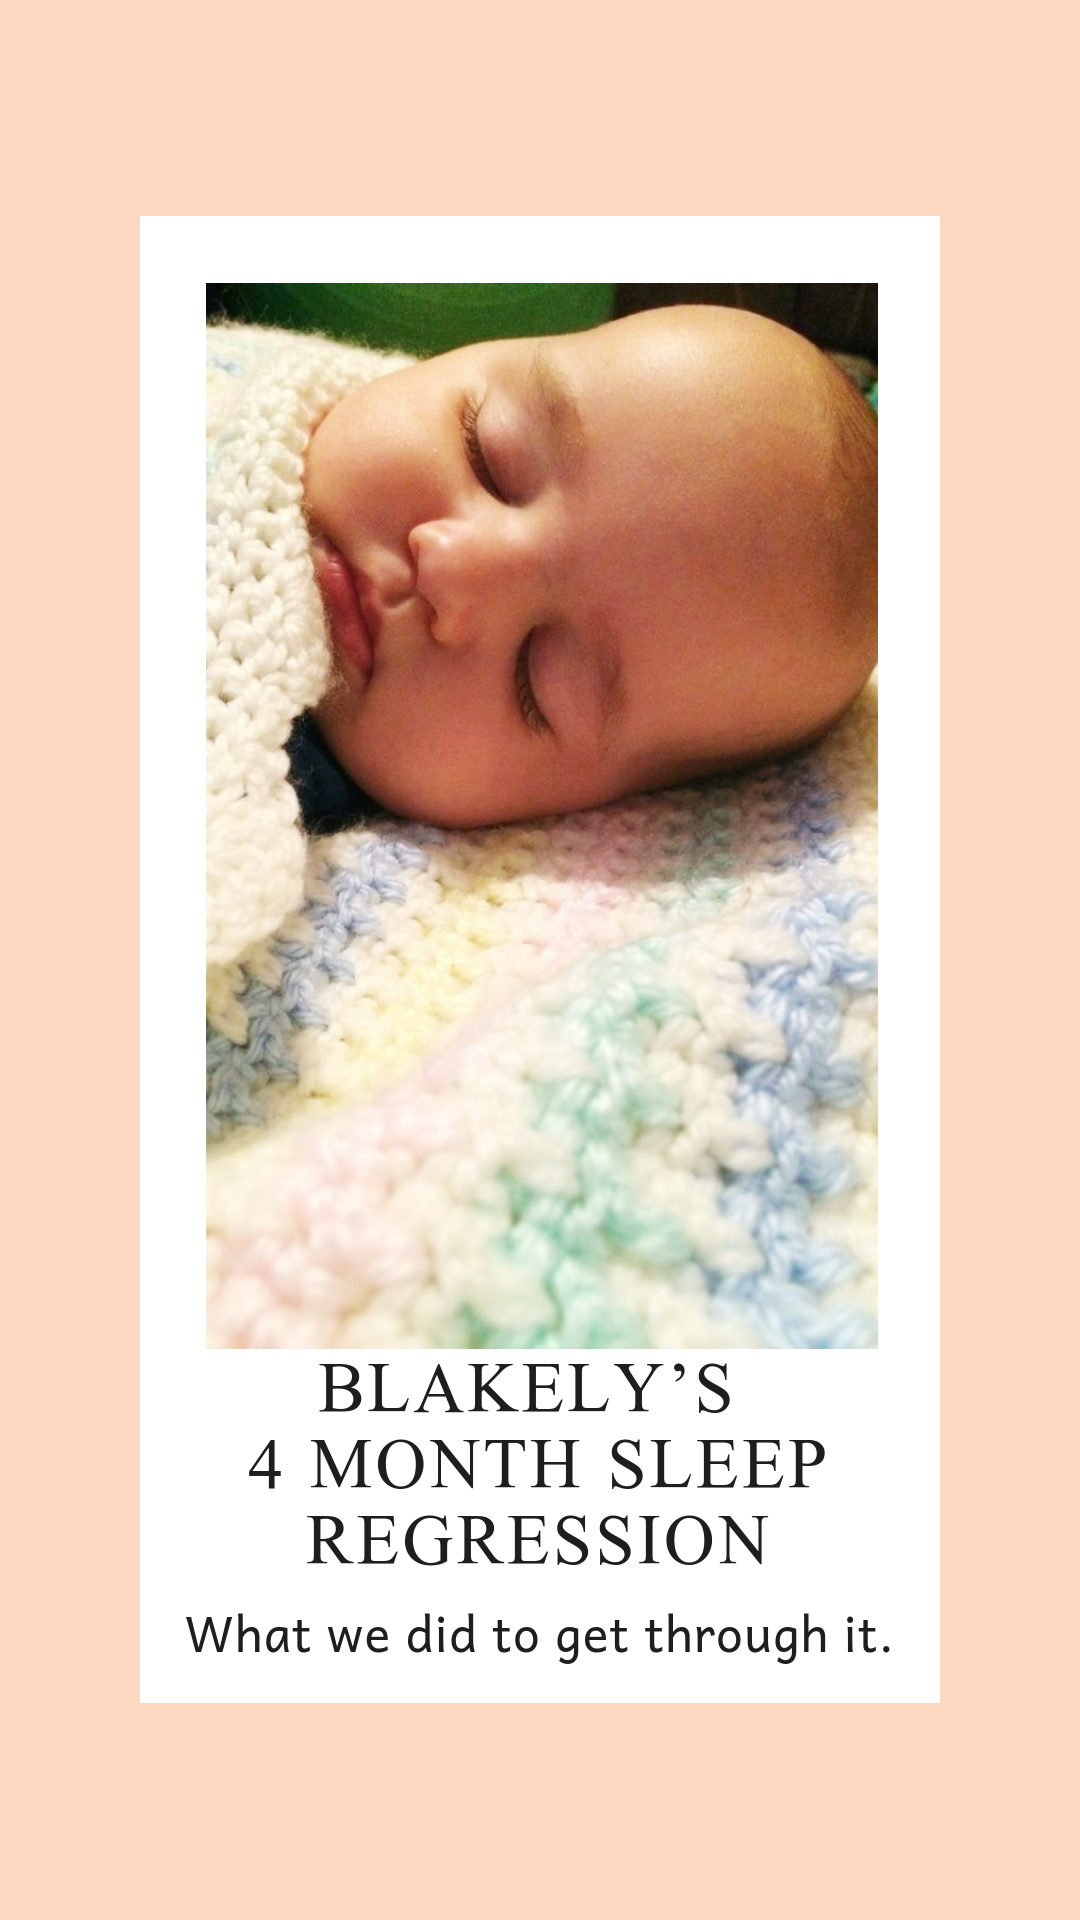 Blakely’s 4 Month Sleep Regression: What We Did to Get Through It